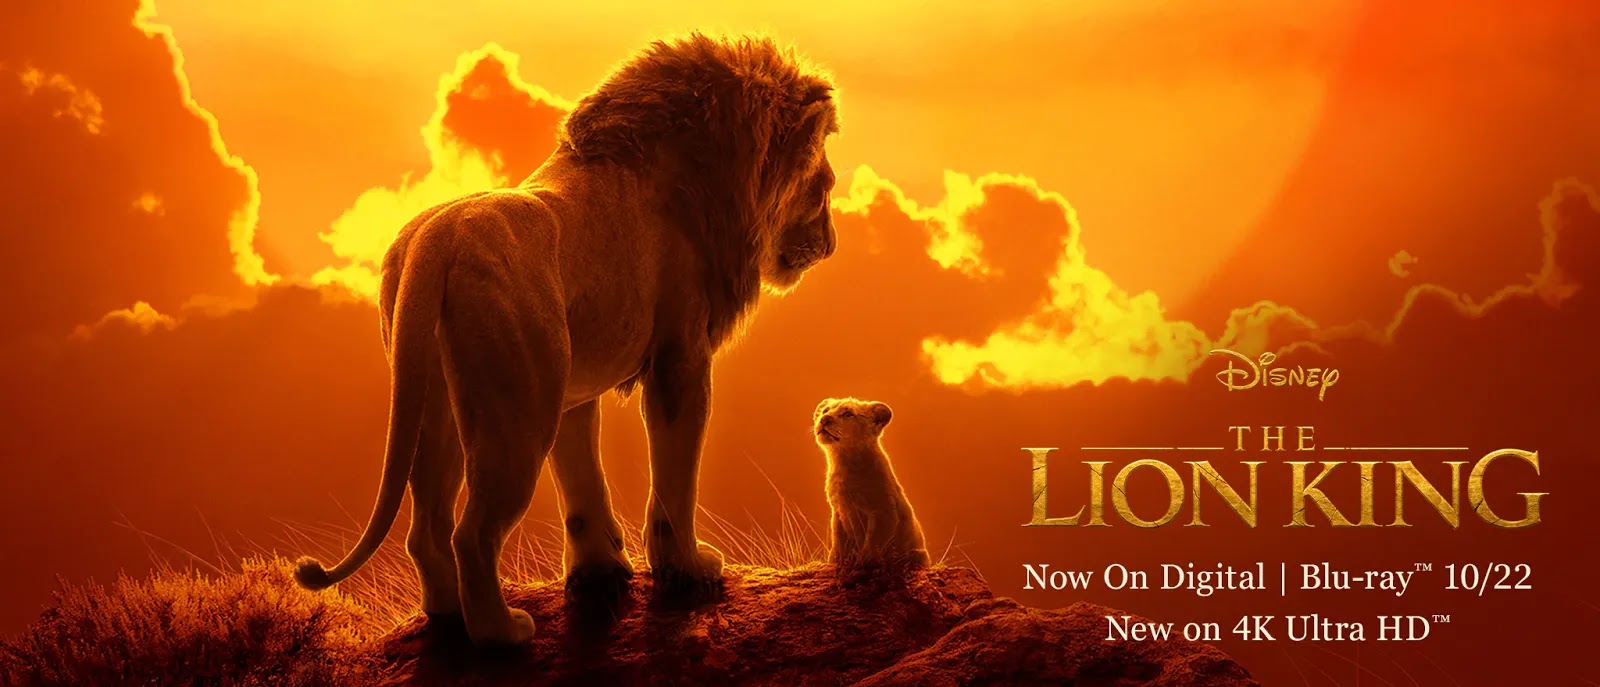 Download Film The Lion King 2019 Bluray 480p 720p 1080p